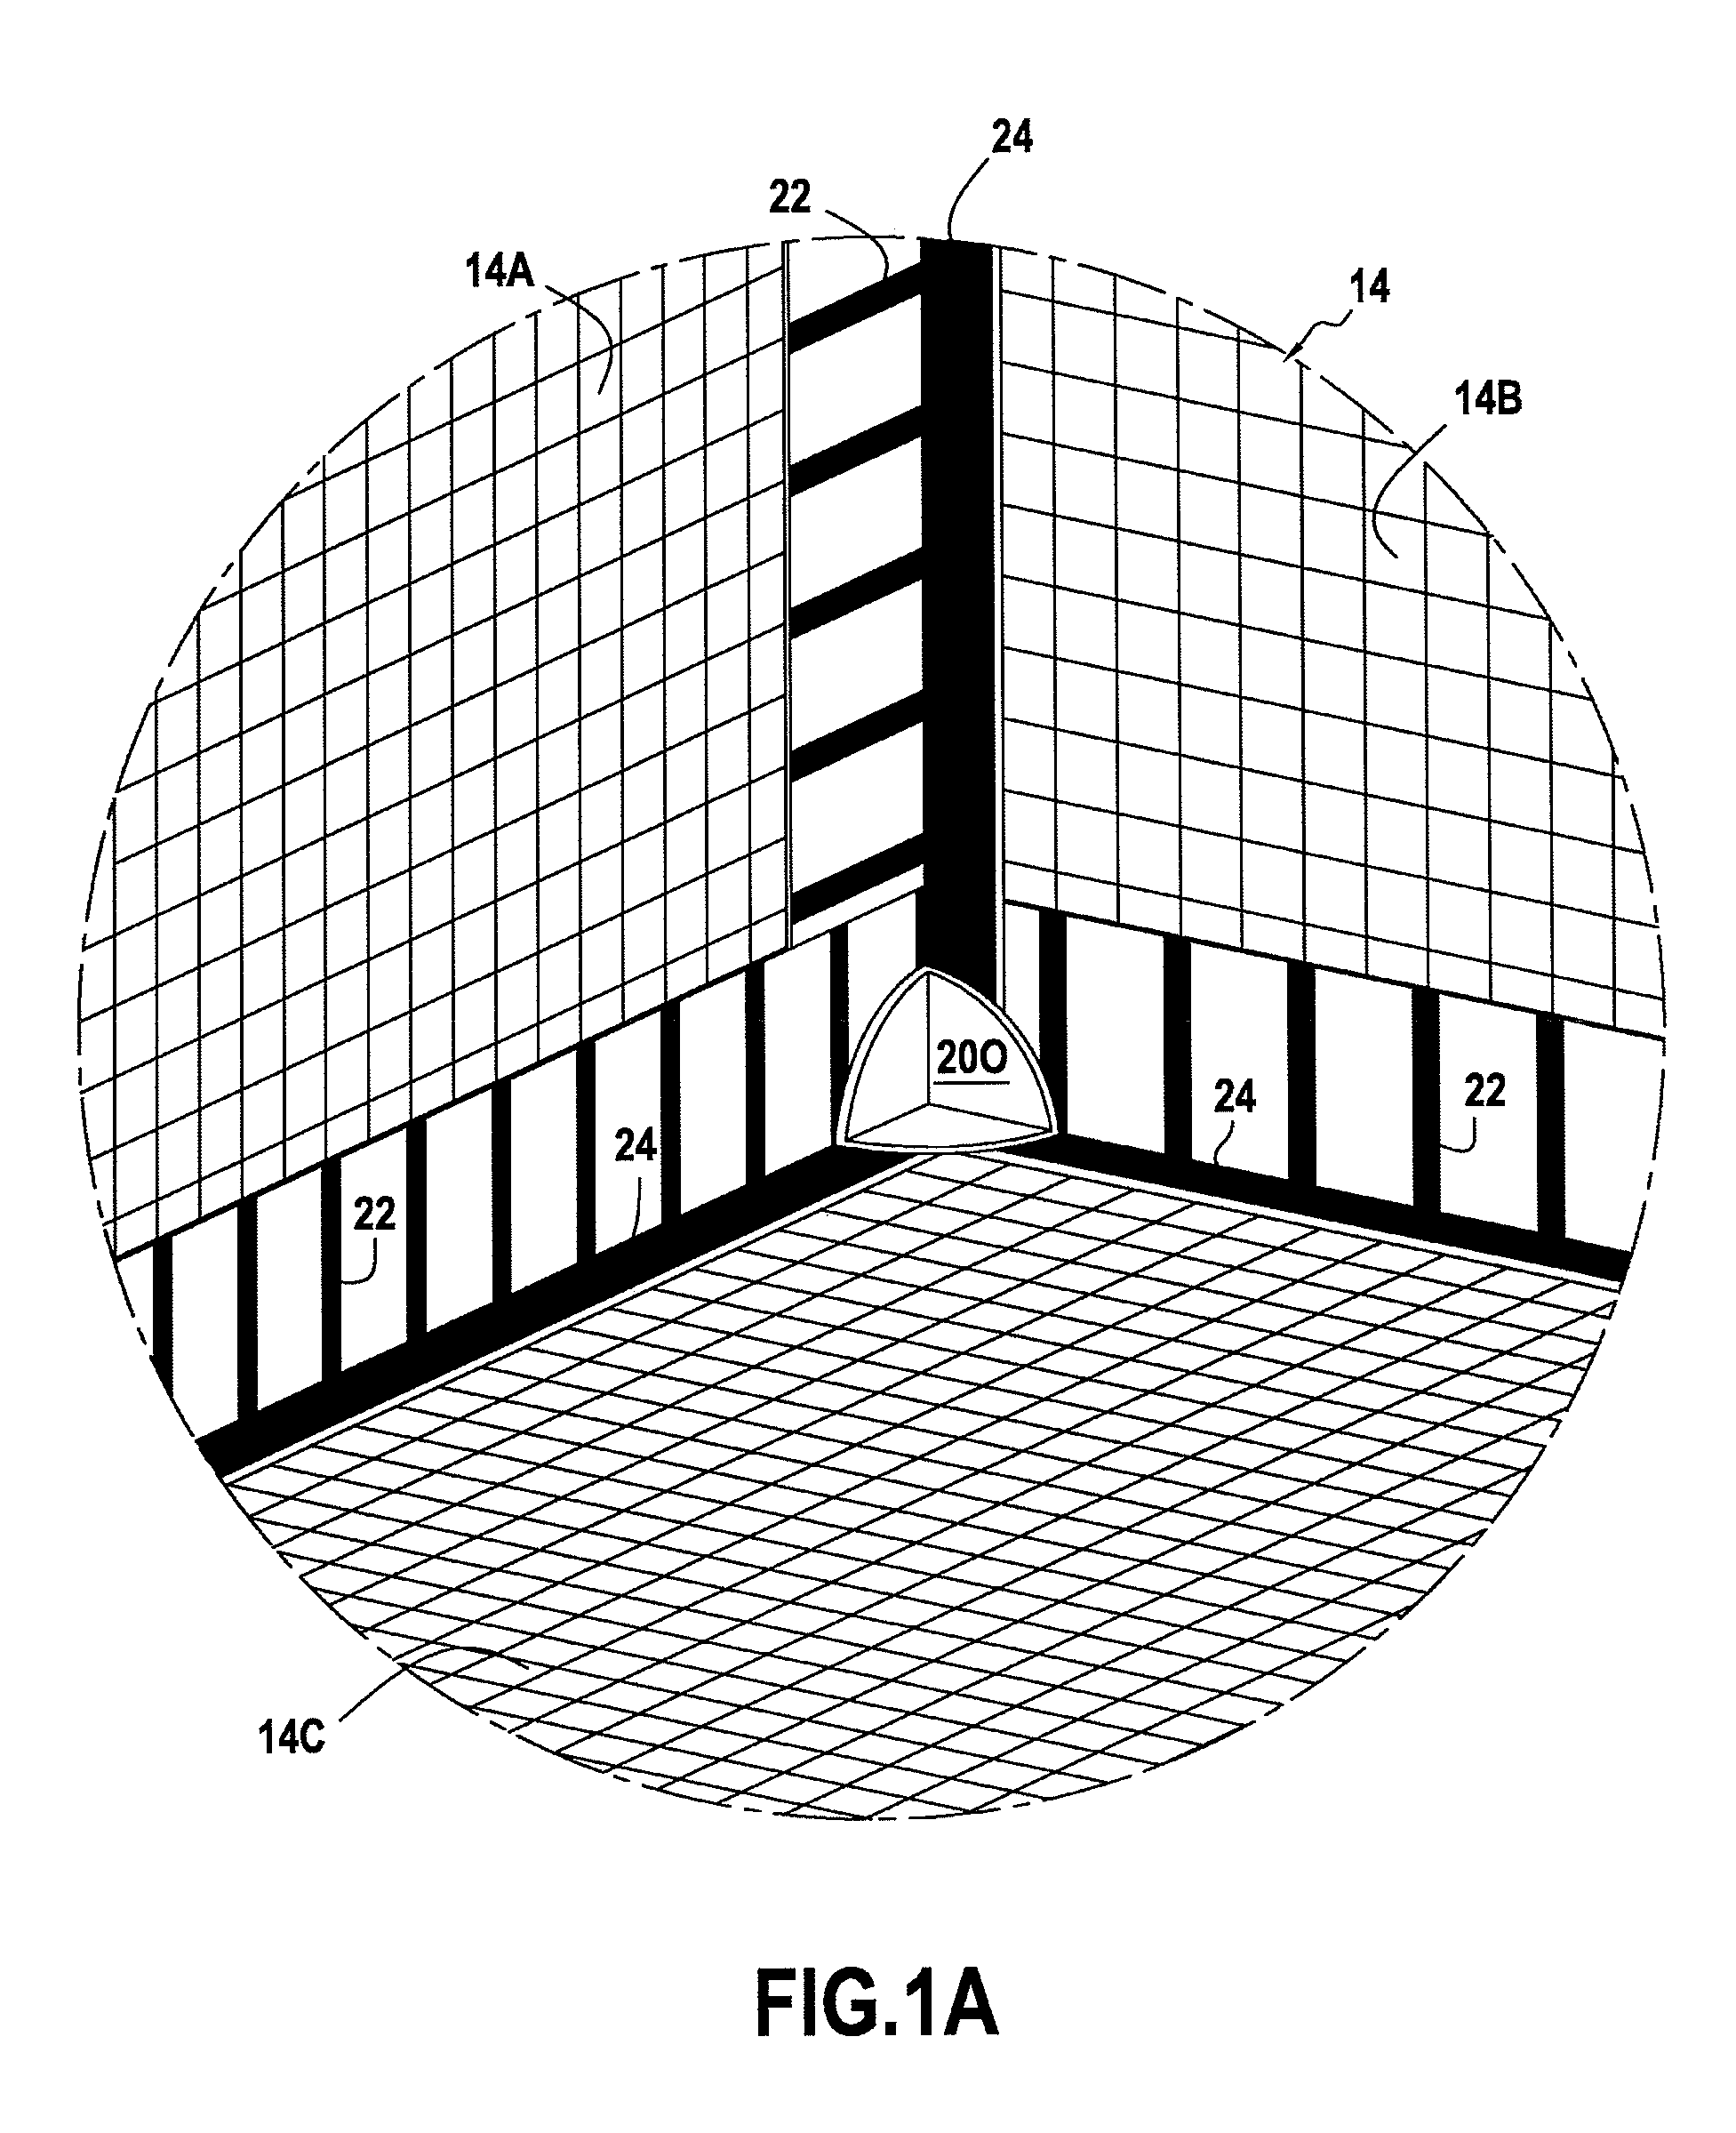 Apparatus for determining the three dimensions of a parcel